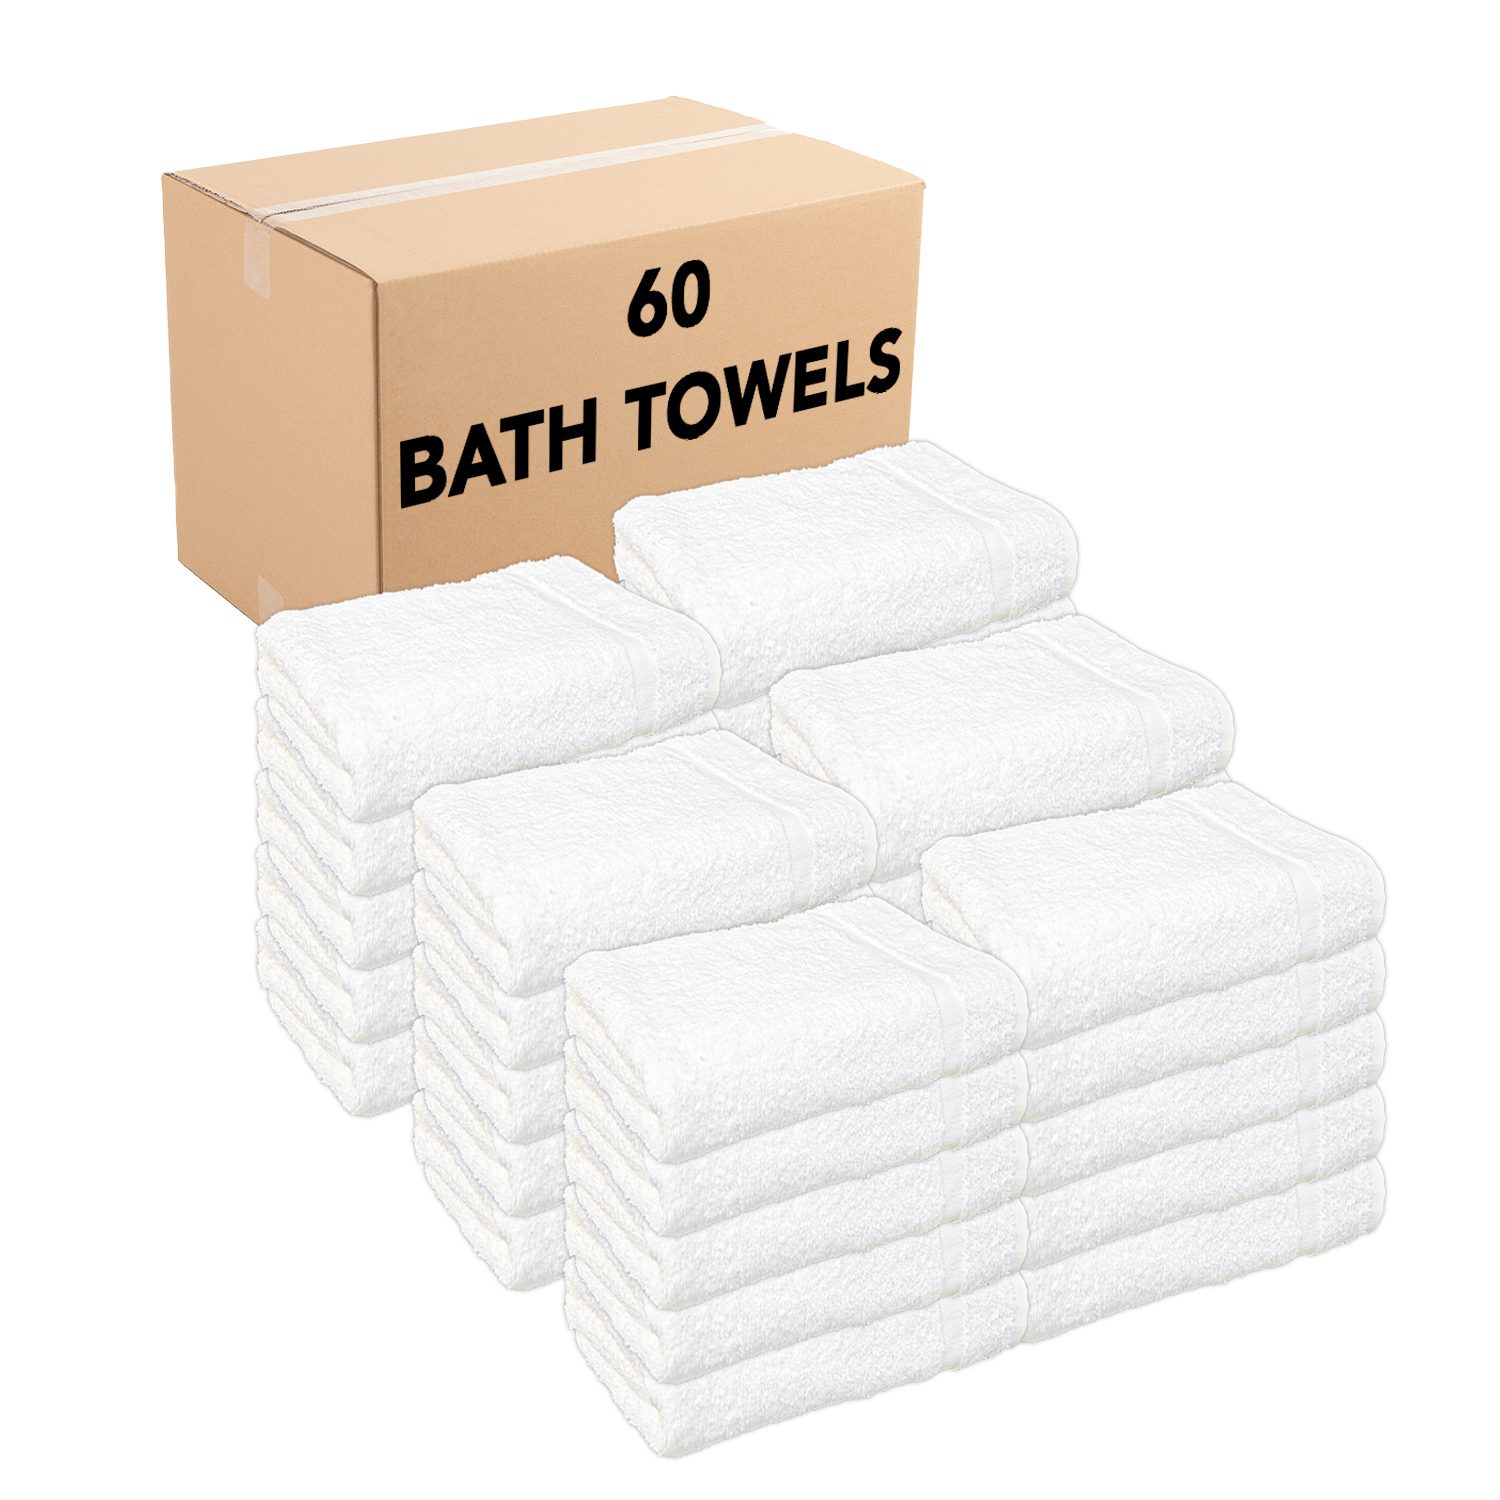 Towels N More - 12 Pack 22x44 Soft Gym Towels/Small Bath Towels White 100%  Ring Spun Loops - Home Essentials Lightweight Bathroom Towels Set - Ideal